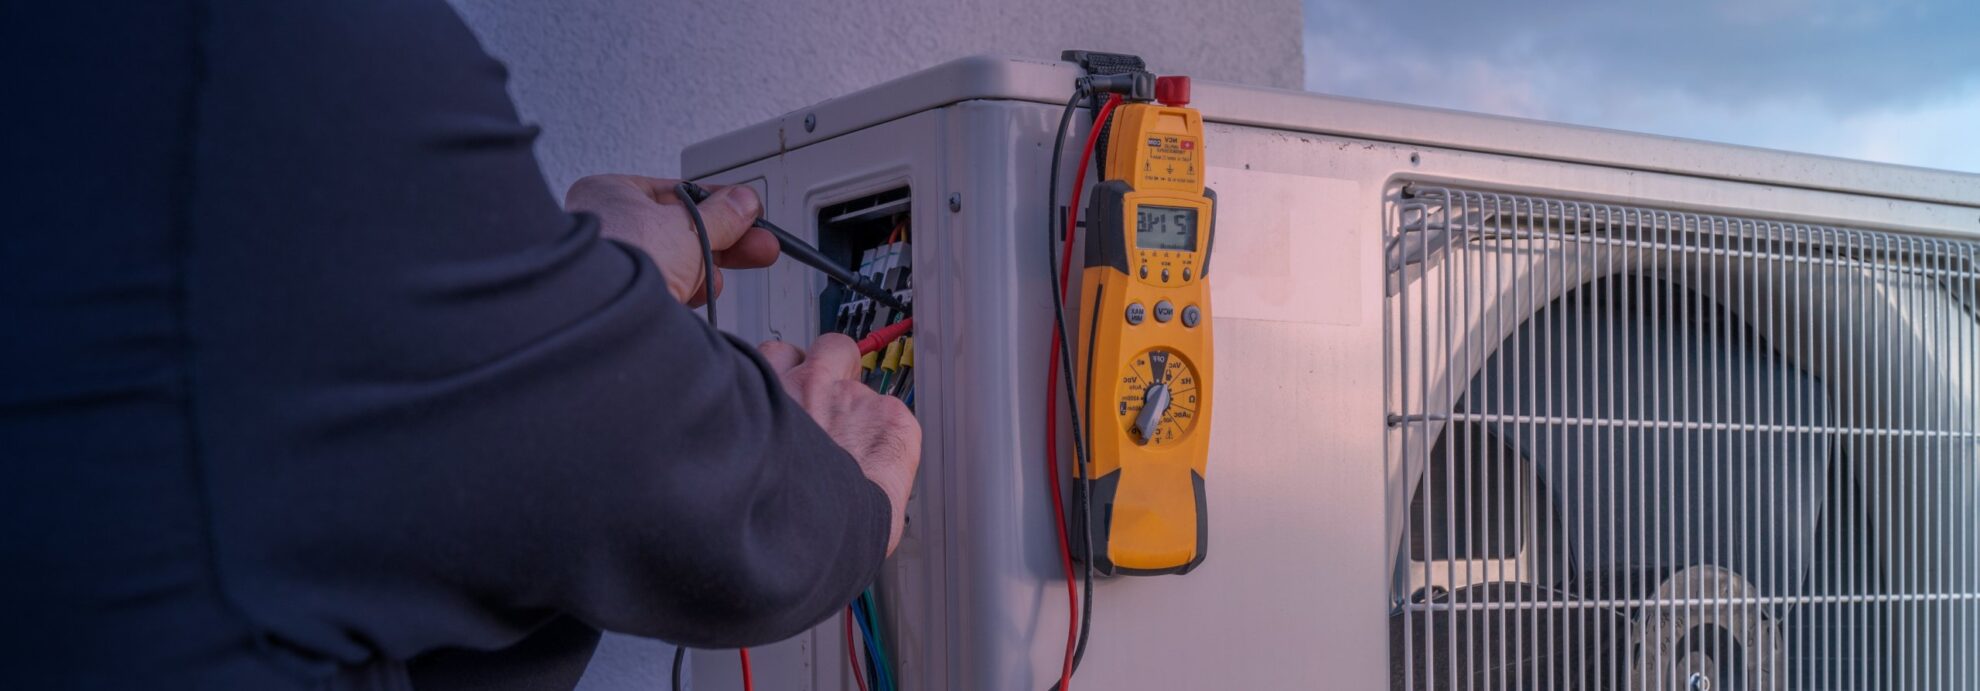 hands testing voltage with test leads at power terminals in remlap al